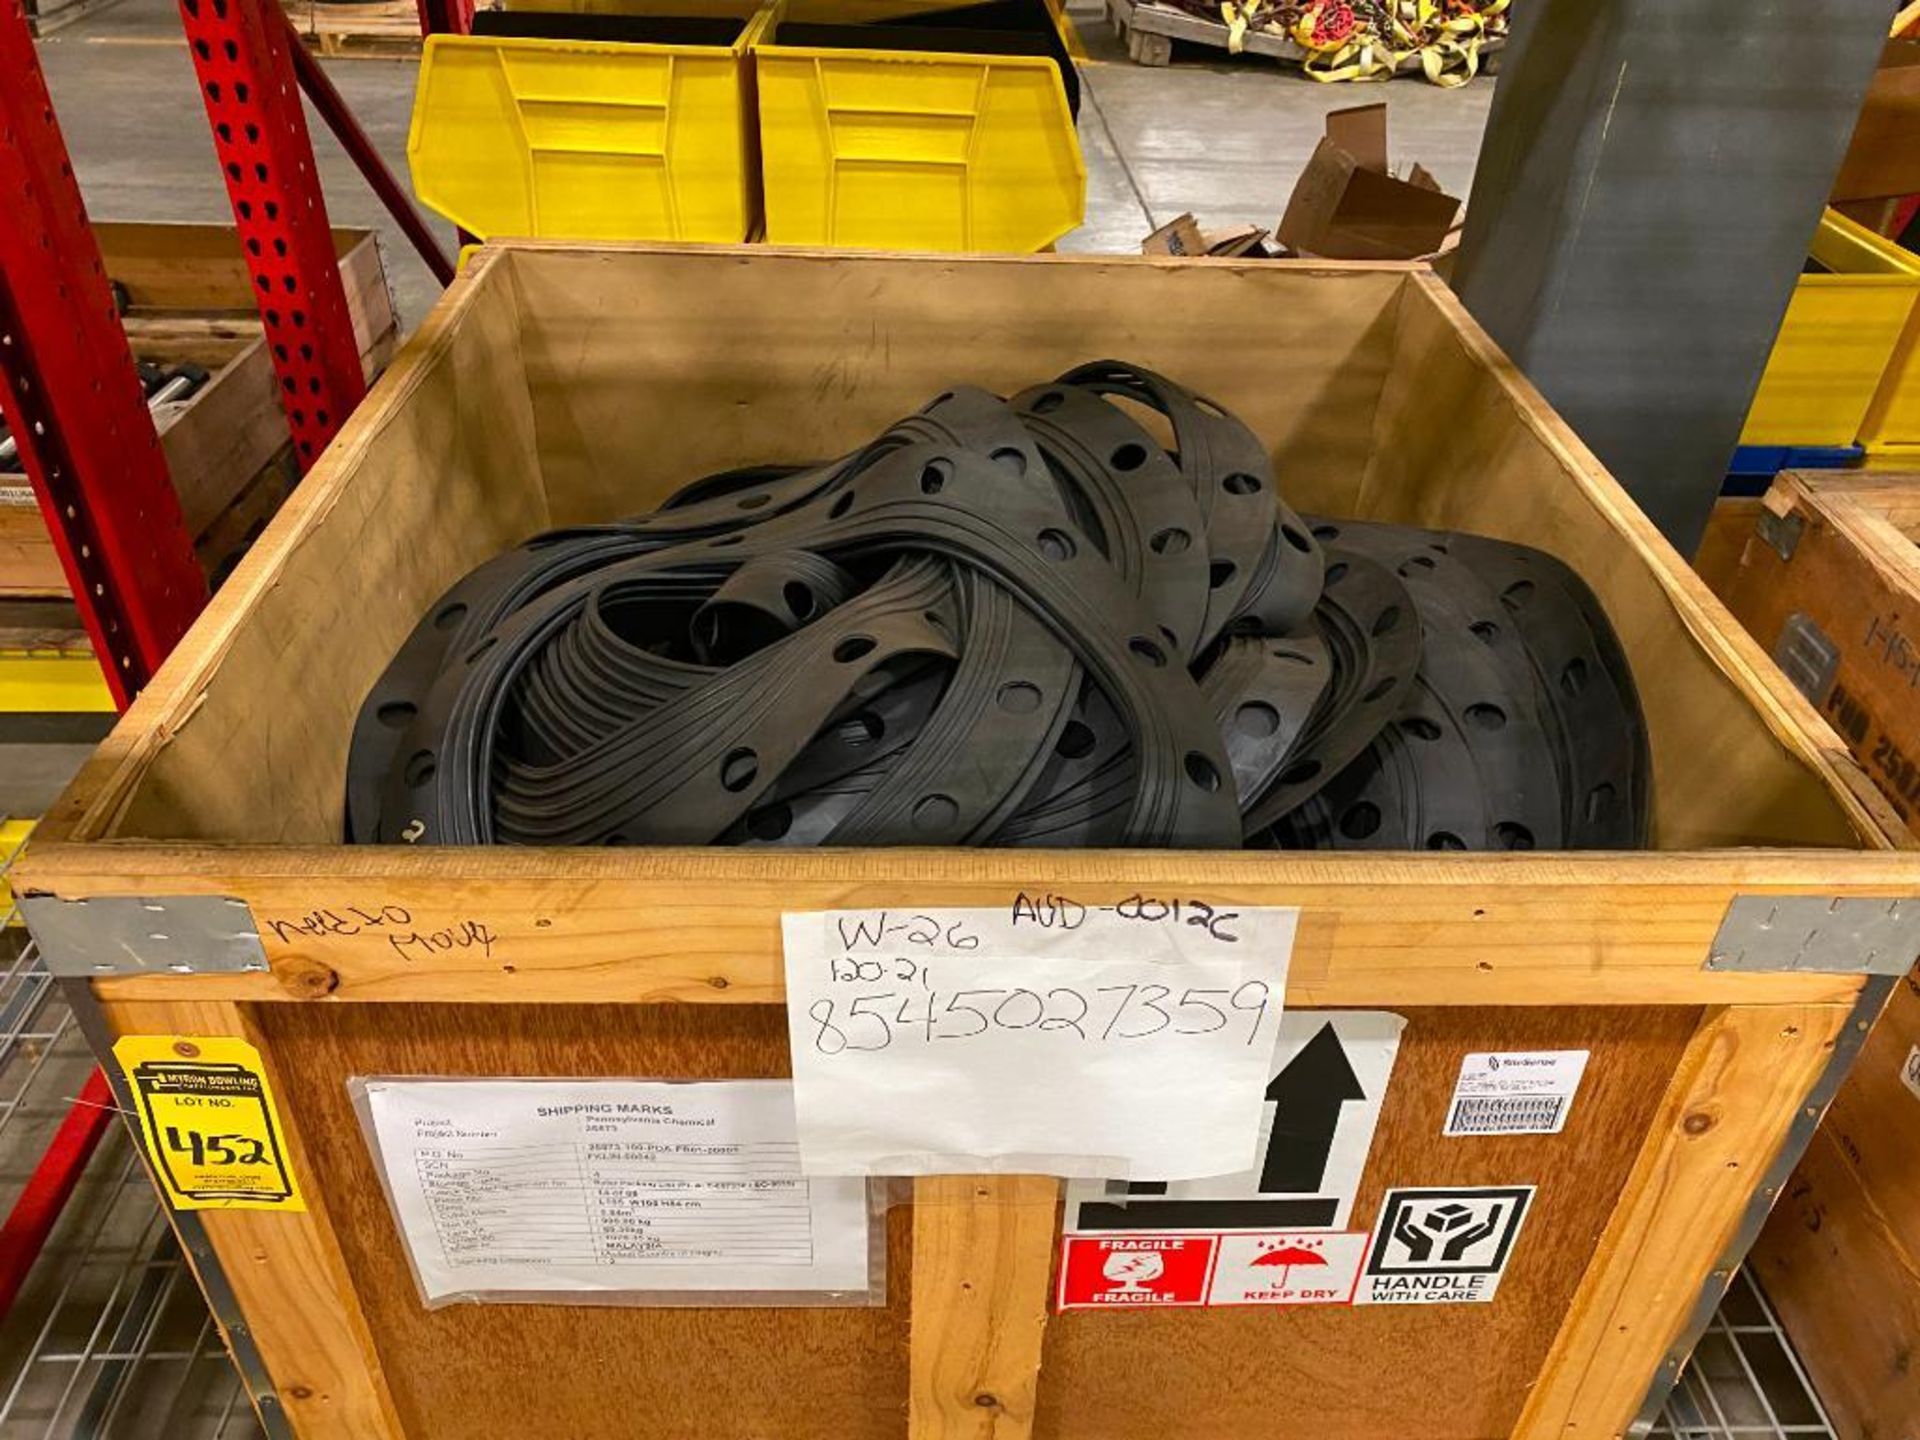 (10) Skids of Assorted Rubber Gaskets, Flange Rings & Pipe Covers, Bo Metals Void Caps, Coated Bolts